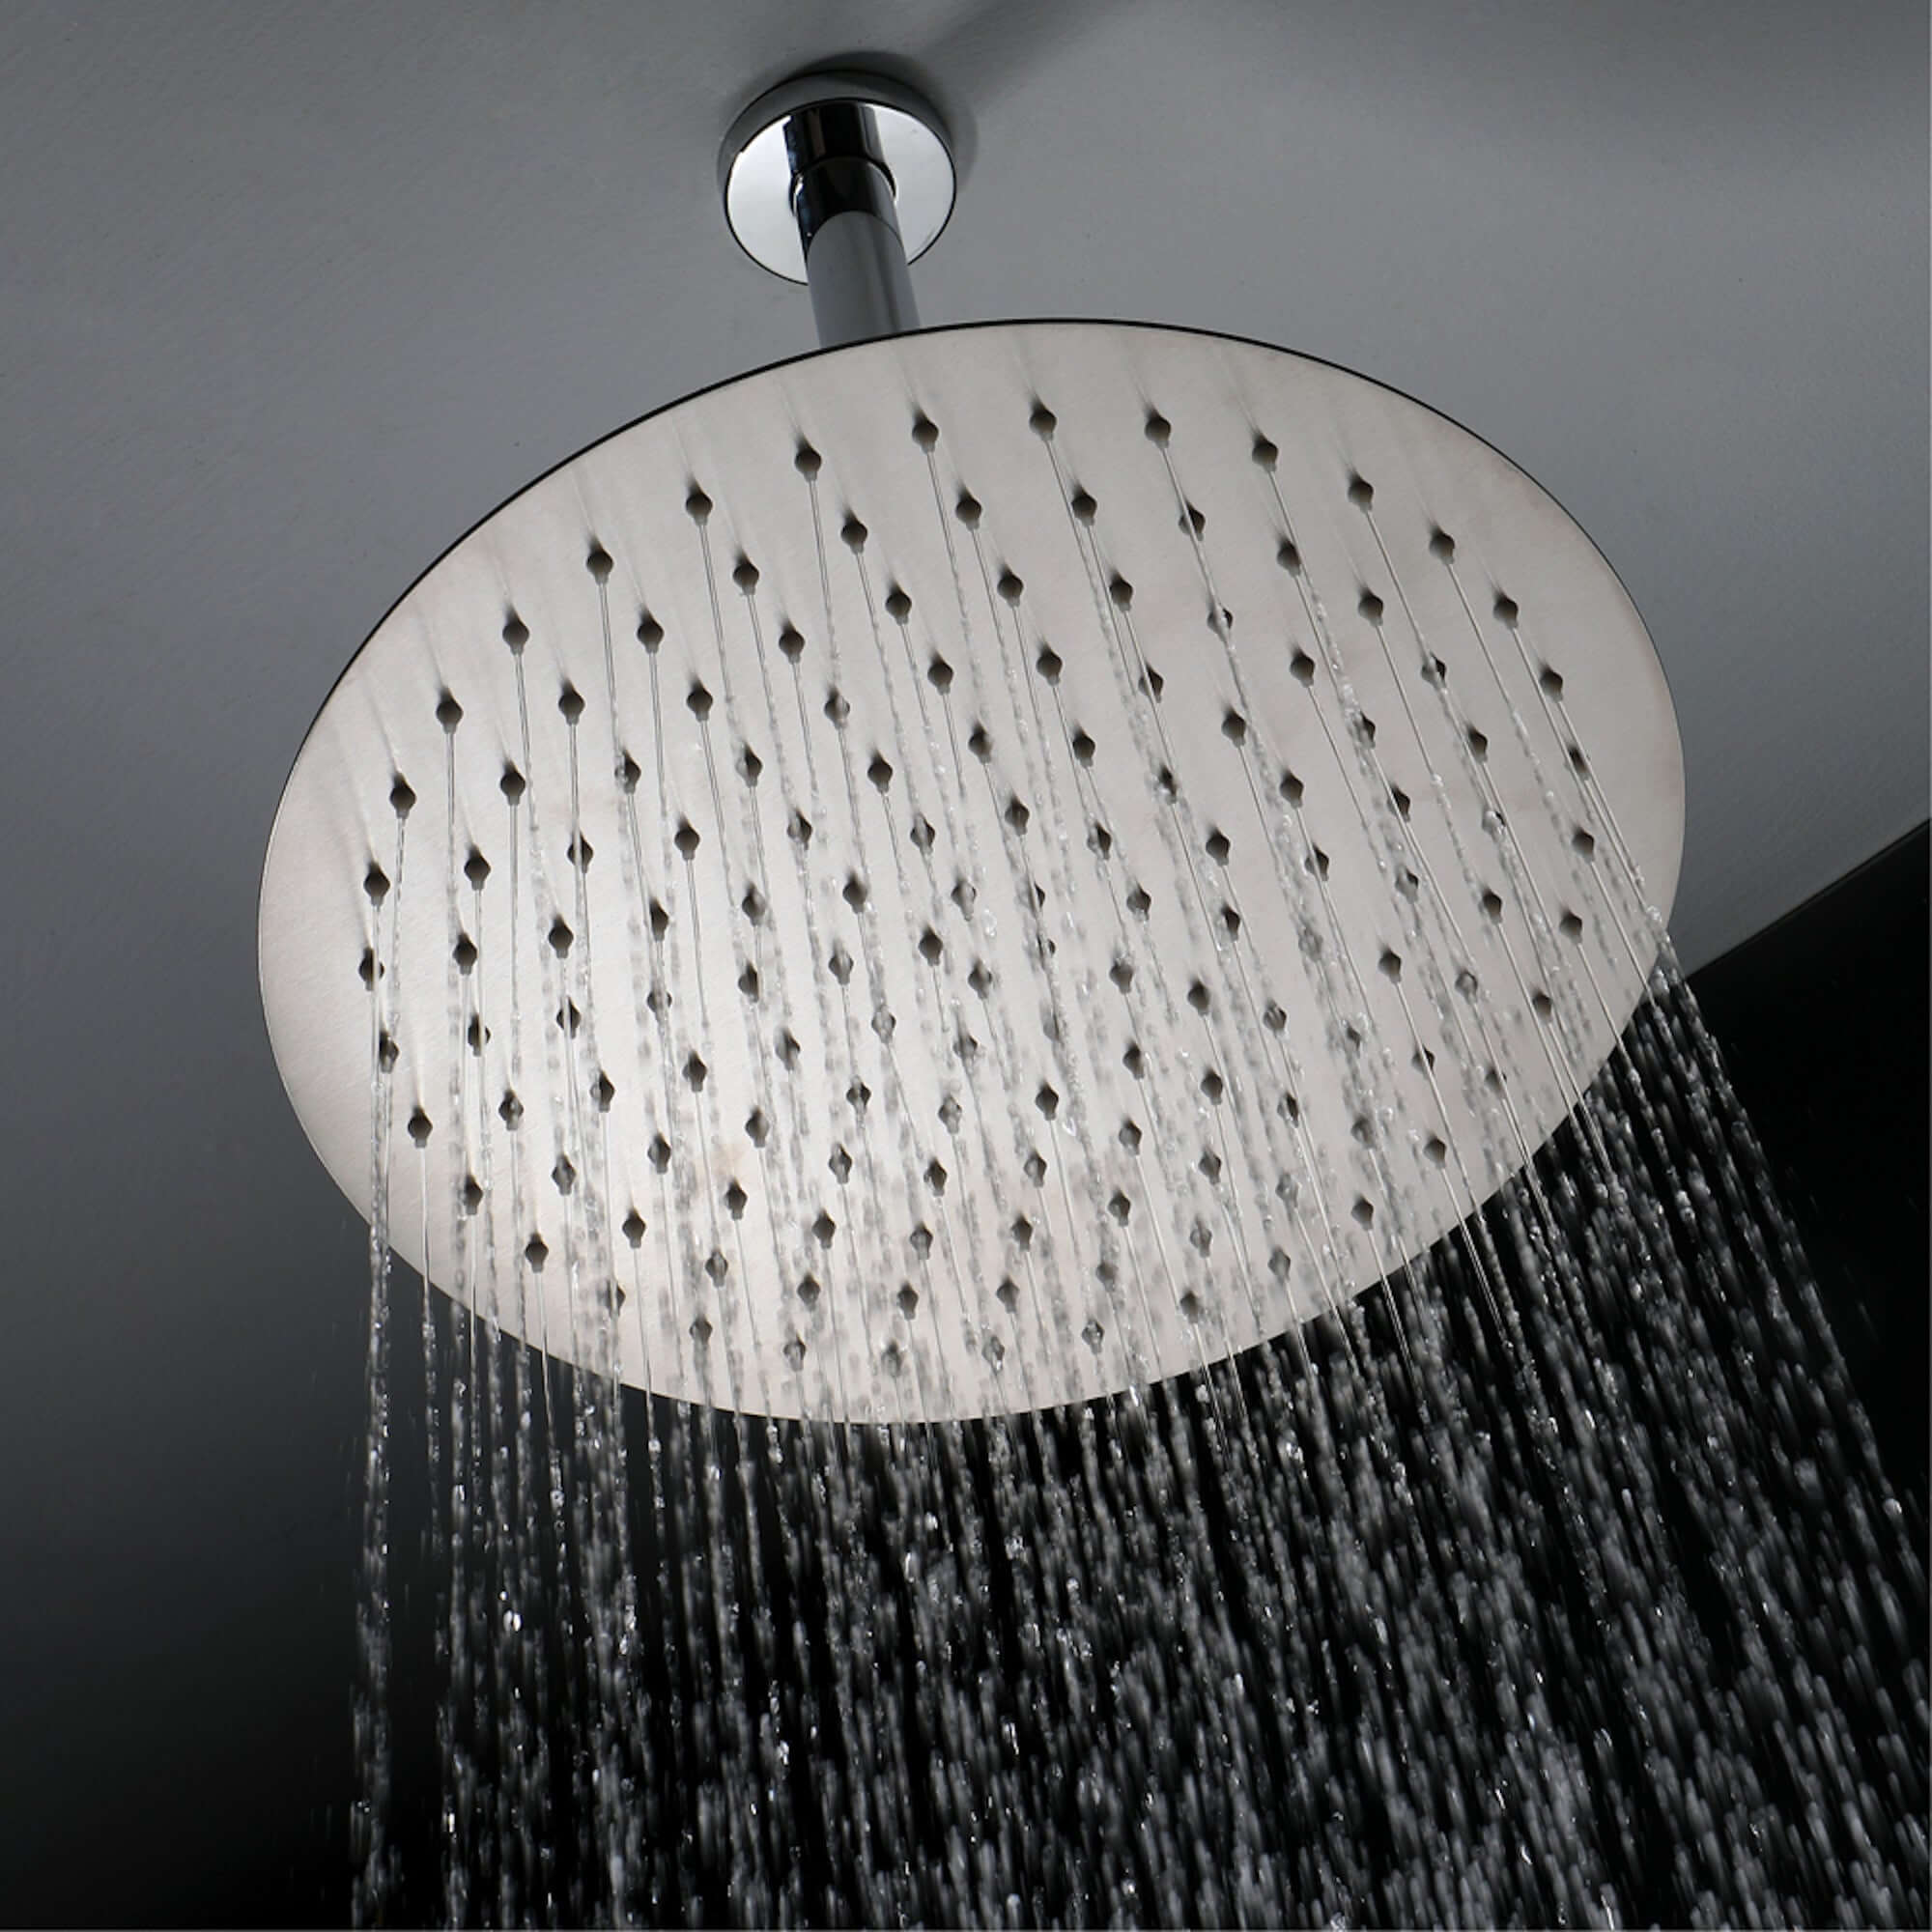 Buy Ceiling Mounted Round Single Function Concealed Rain Shower Set - B-9001 | Shop at Supply Master Accra, Ghana Shower Set Buy Tools hardware Building materials